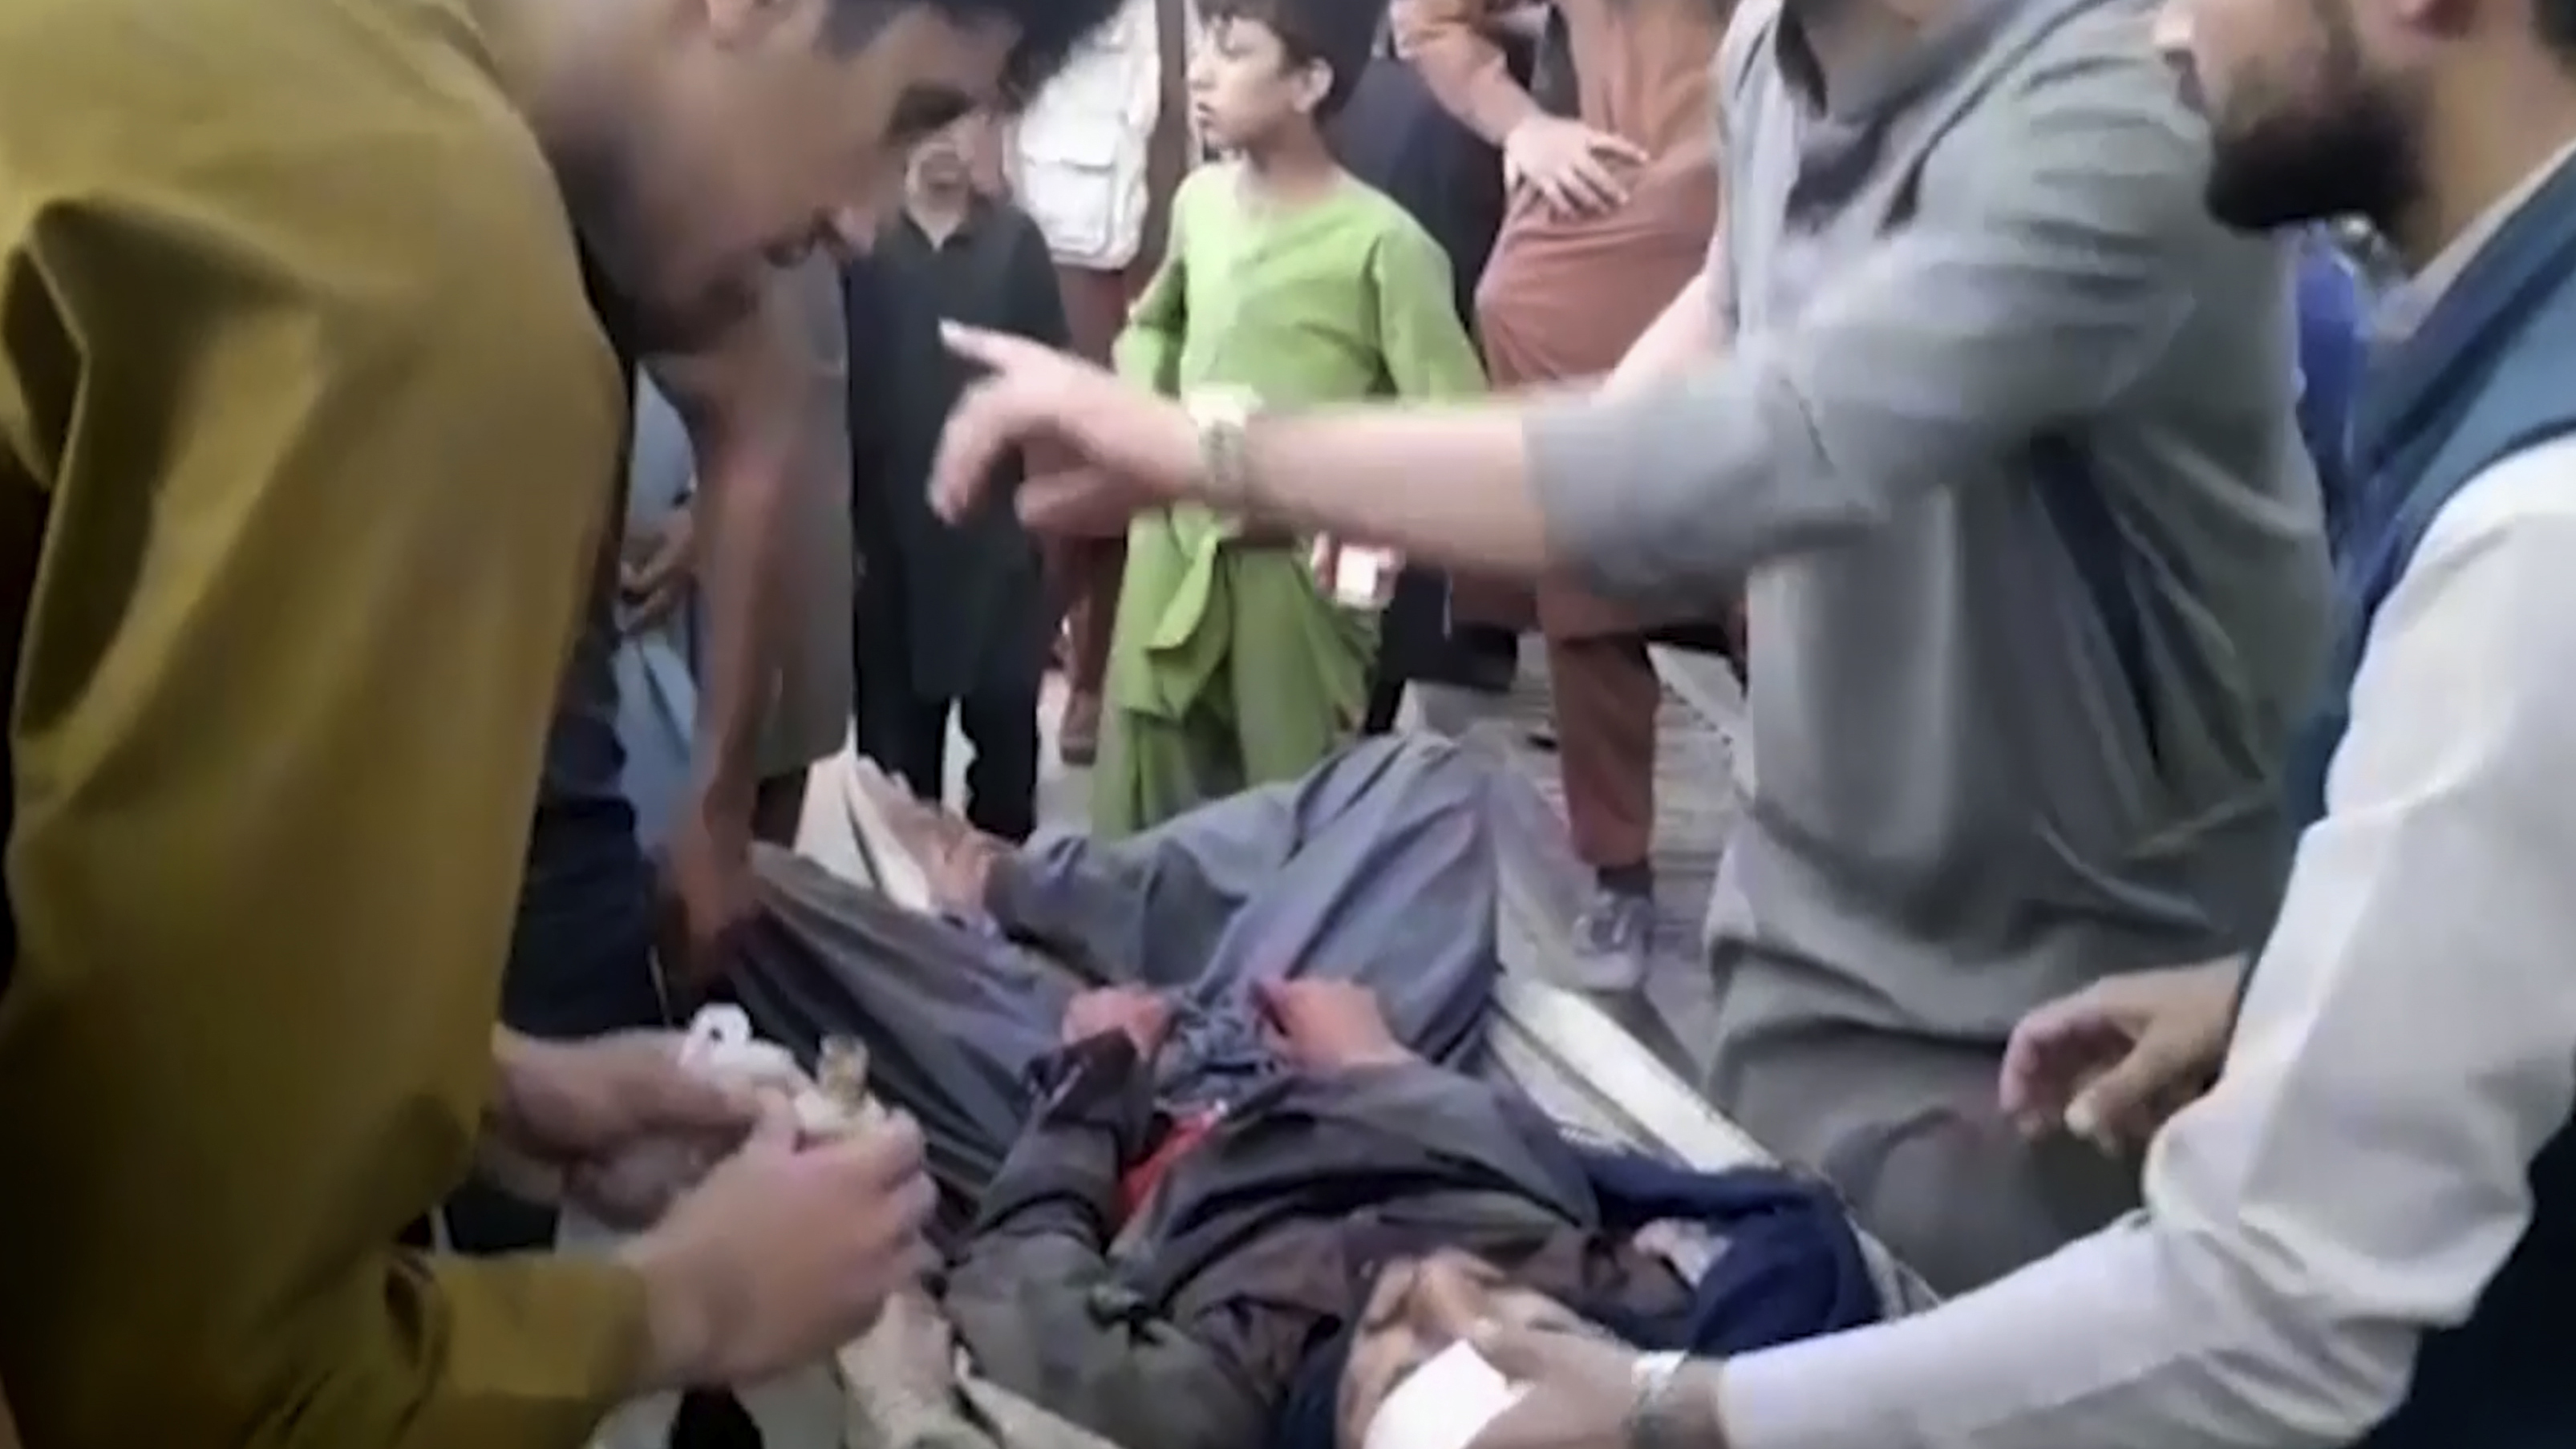 In this frame grab from video, people attend to a wounded man near the site of a deadly explosion outside the airport in Kabul, Afghanistan.